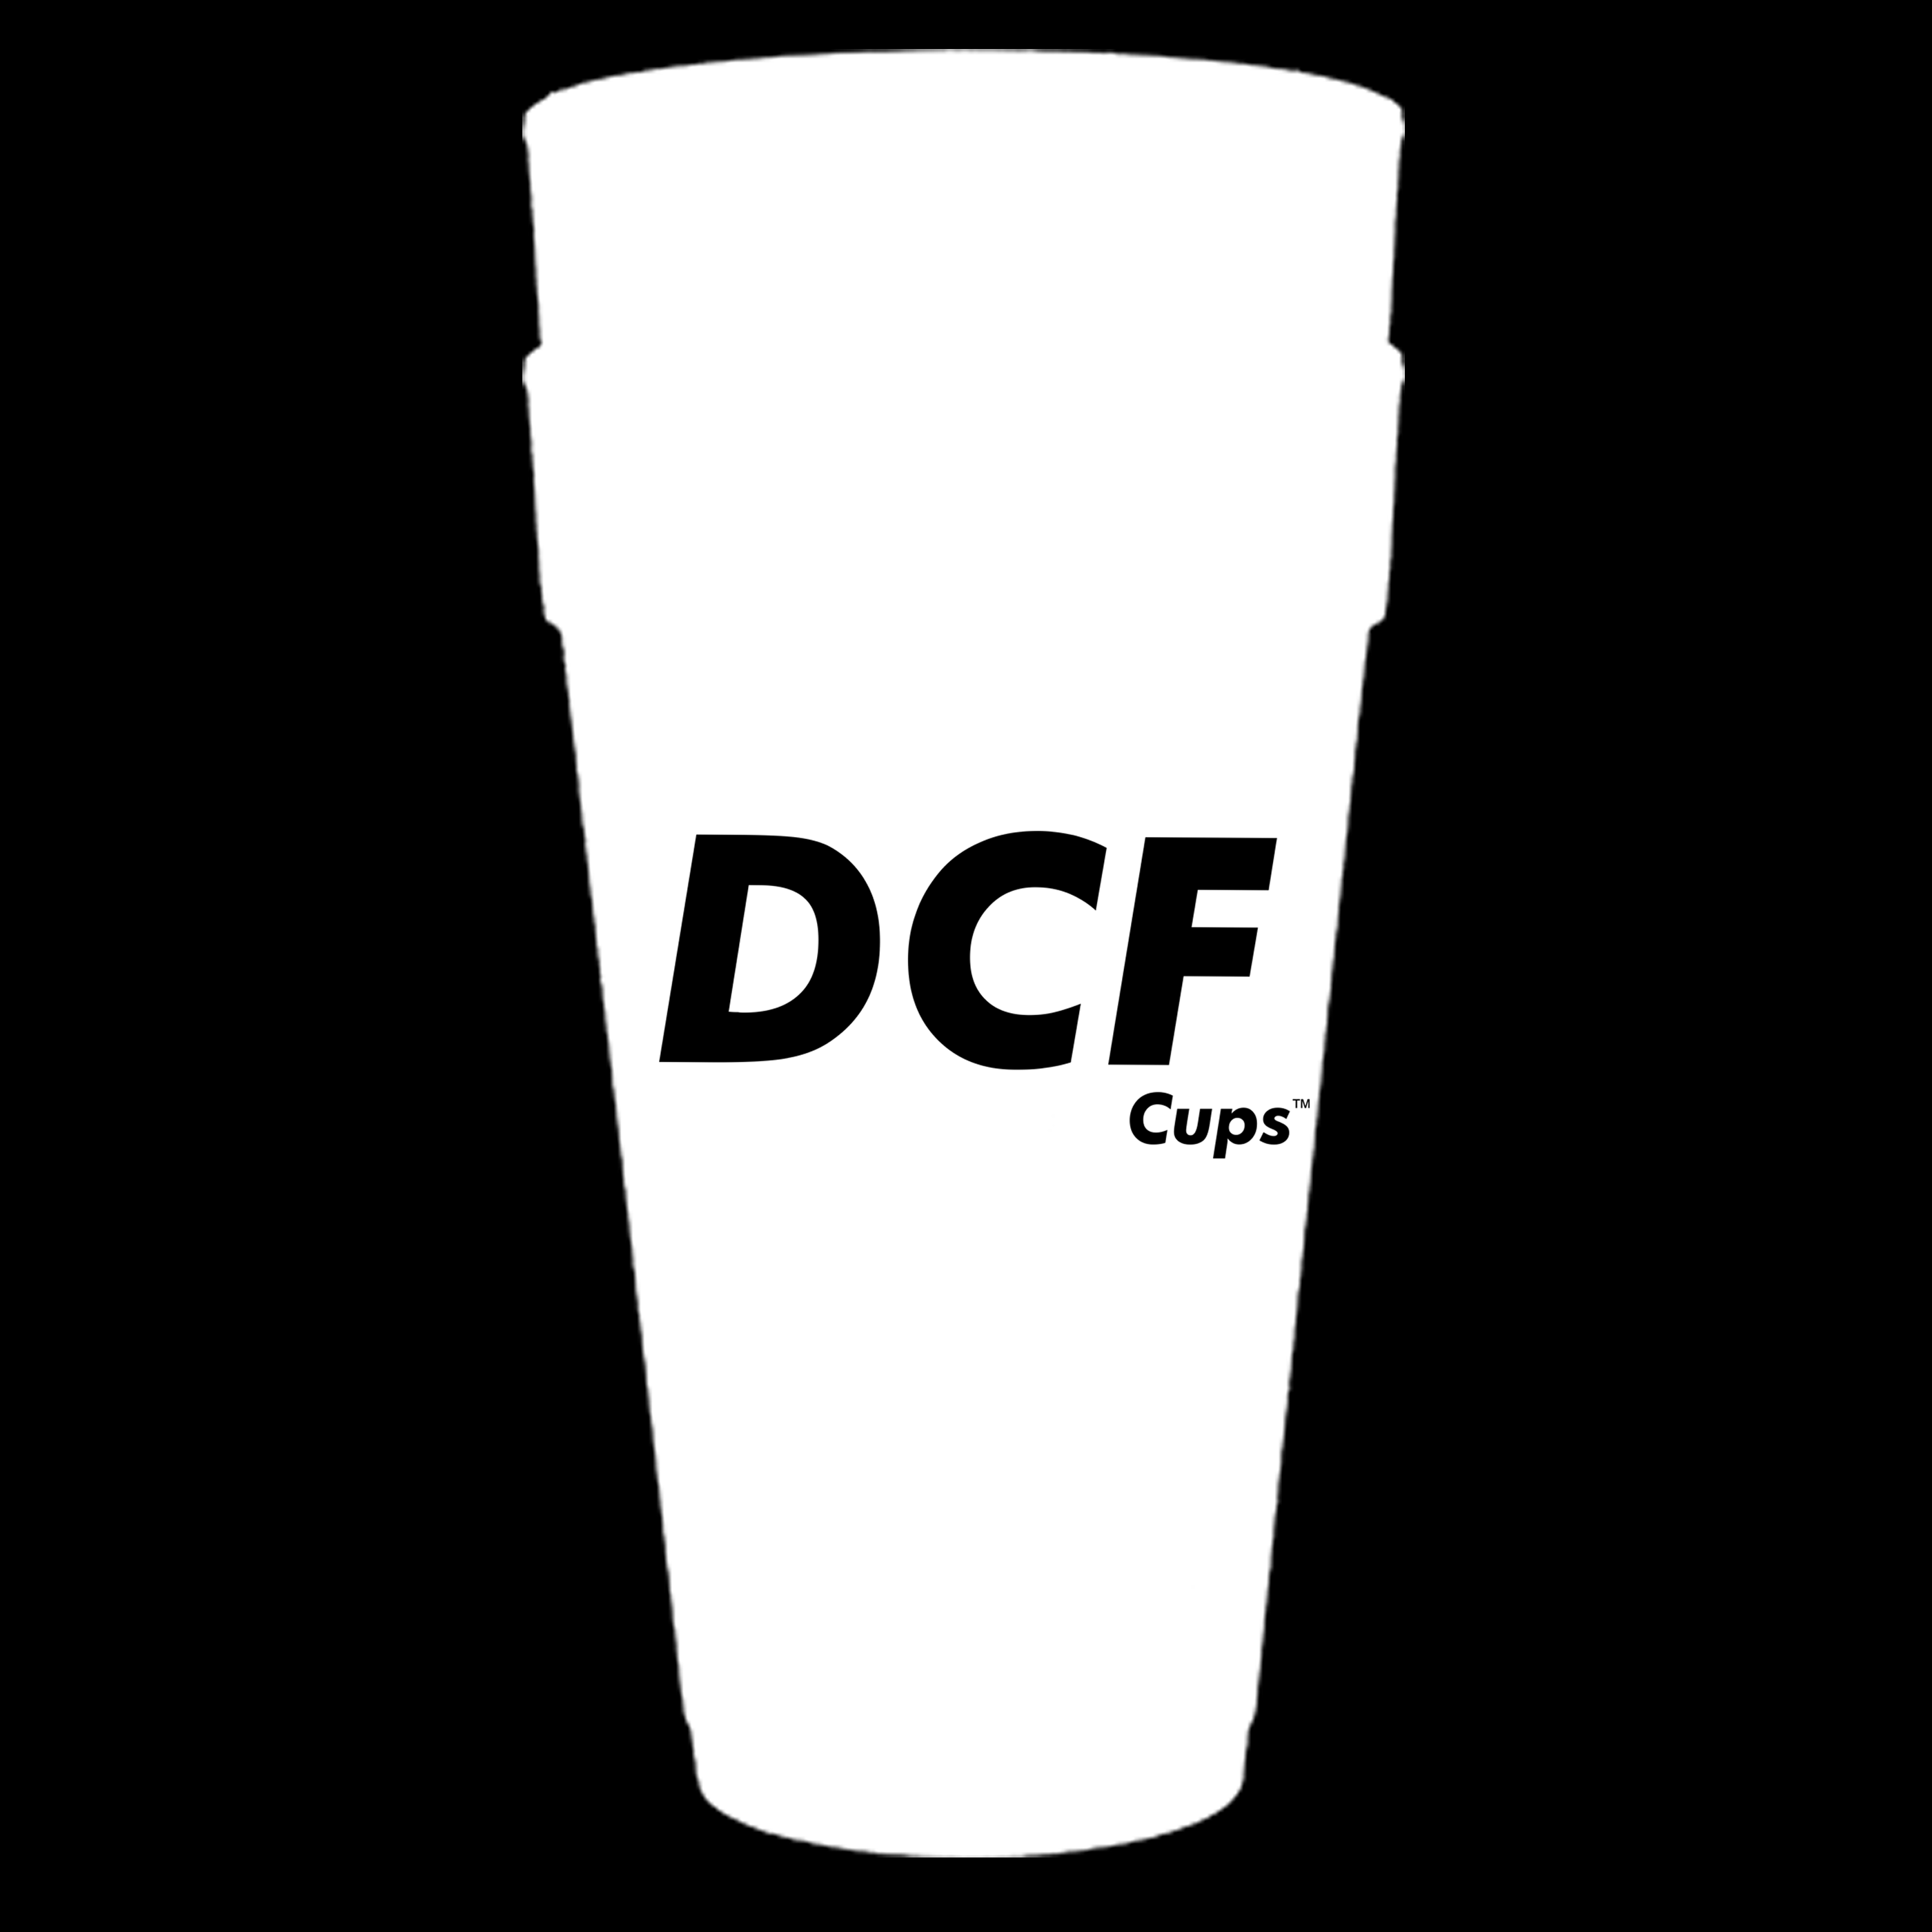 Дабл кап. Дабл кап PNG. Футболка Double Cup. Double Cup обложка. Cups text